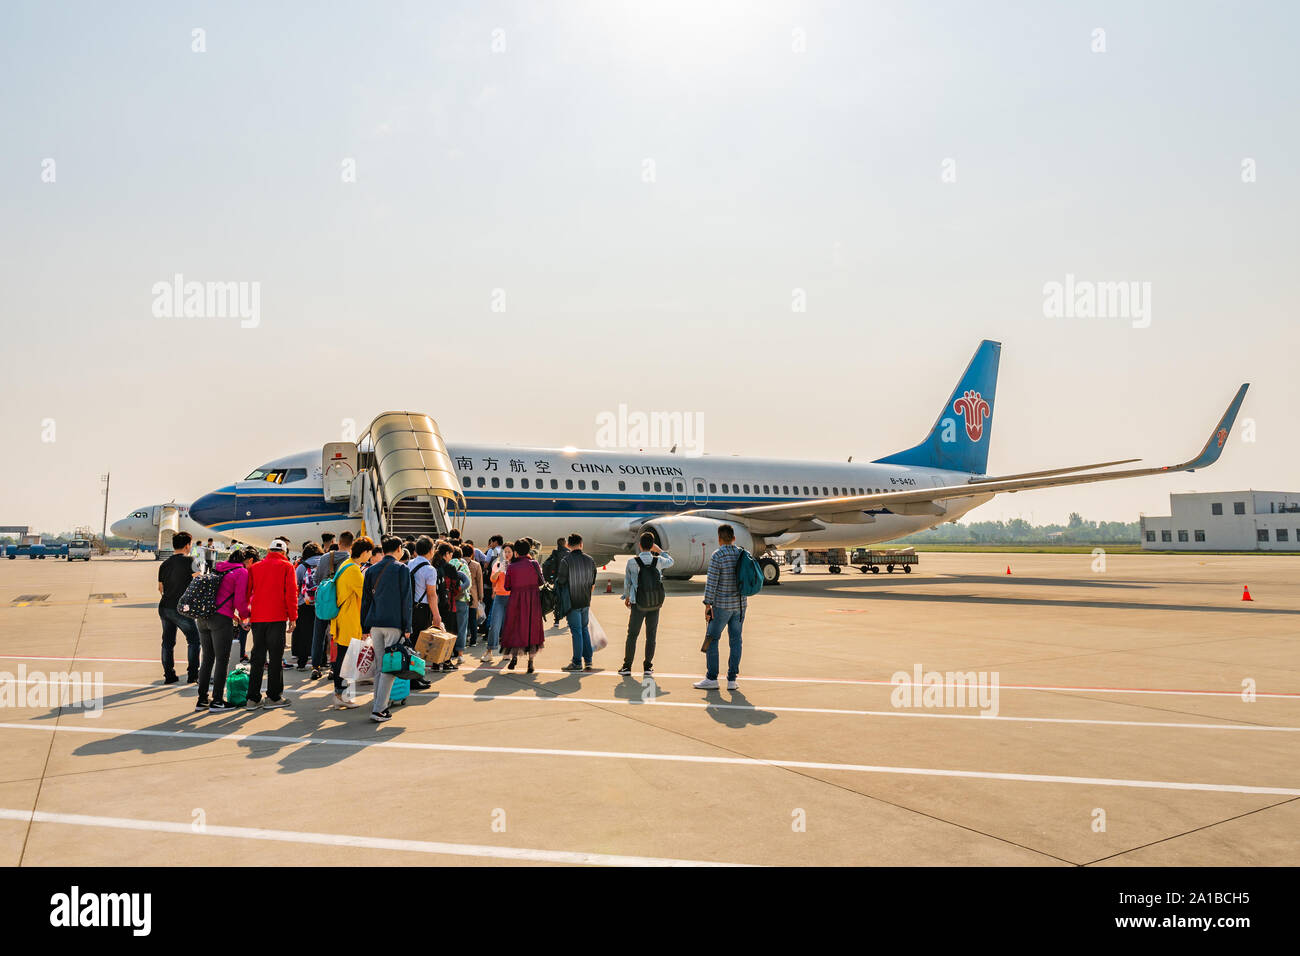 At Nanjing Lukou Airport Passengers are Waiting Outside for Boarding the China Southern Airlines Plane Stock Photo